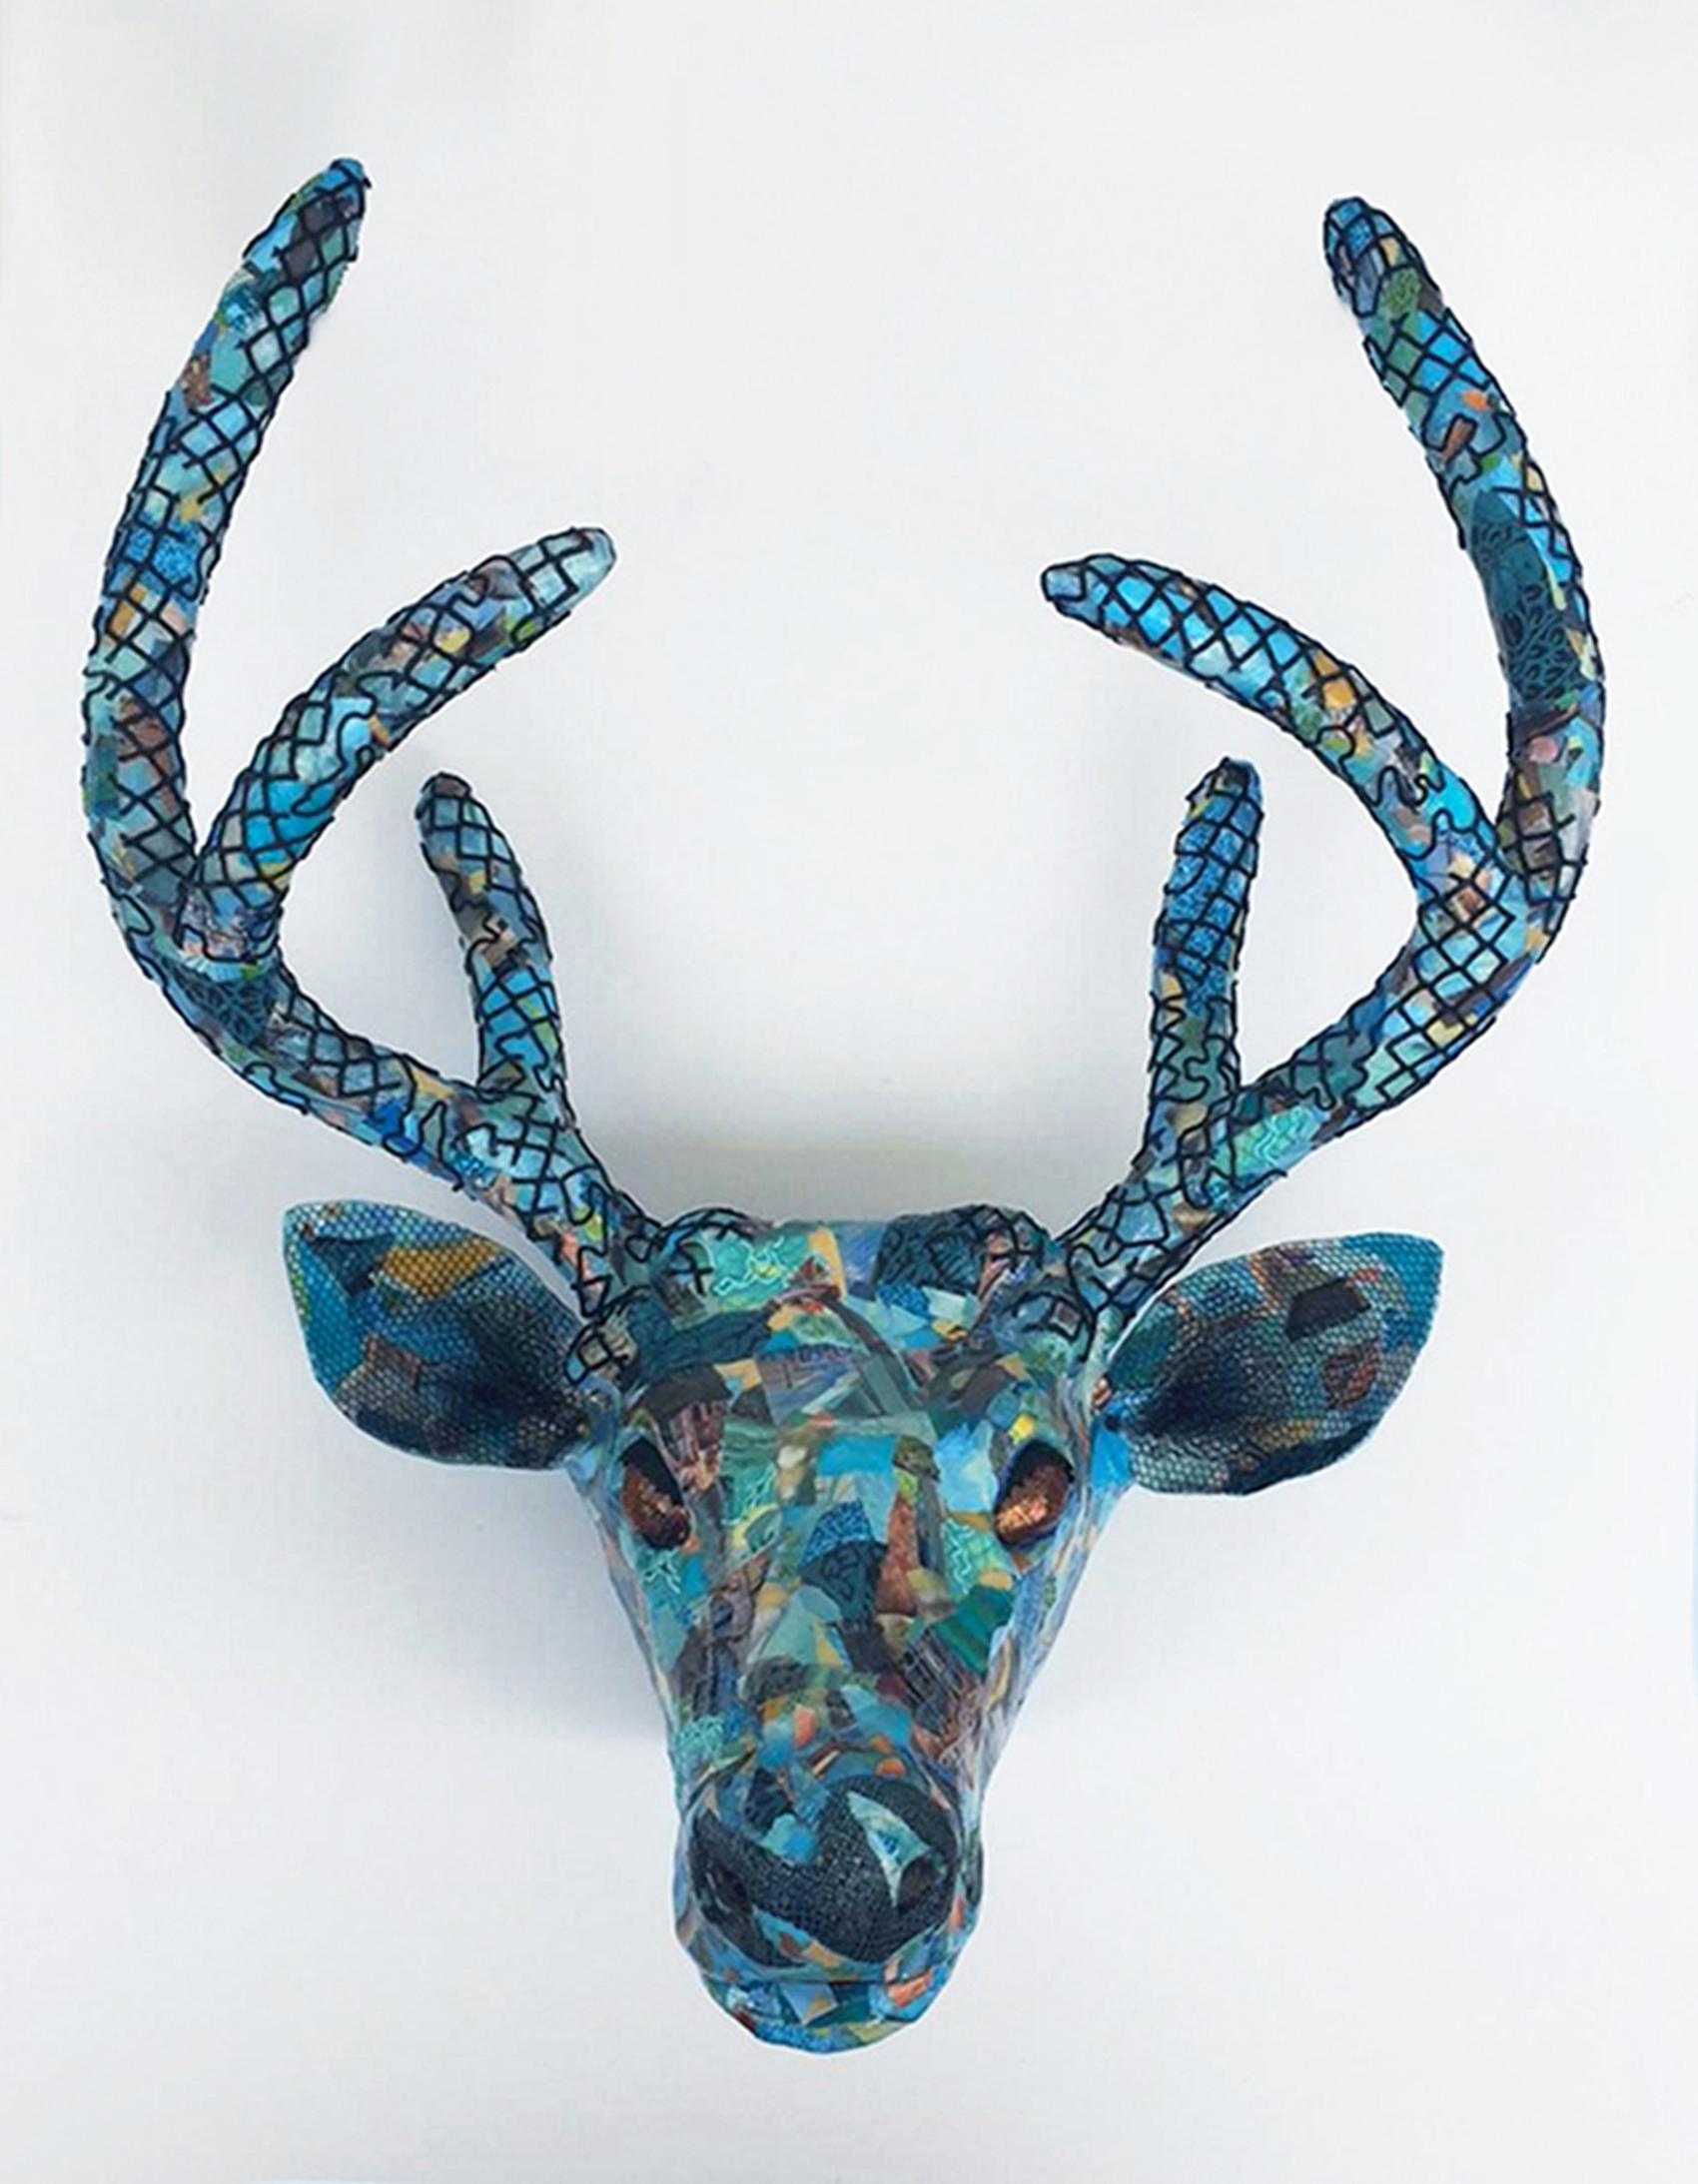 Banff- Beautiful Jeweled, Teal Sculpture of Endangered Deer in Up-Cyled Material - Contemporary Mixed Media Art by Yulia Shtern